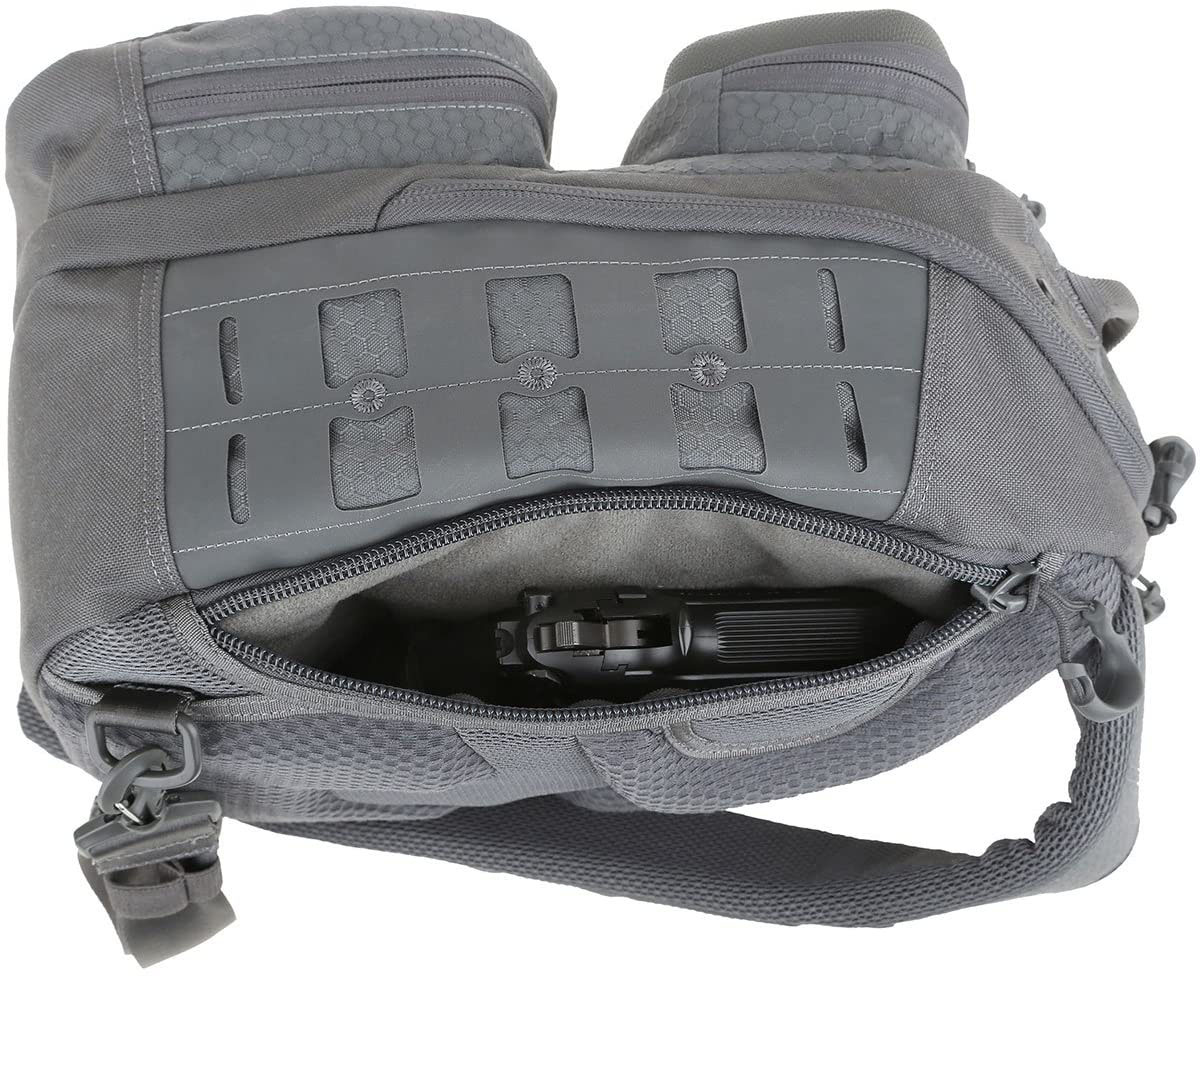 New internal molle backpack Suppliers for outdoor use-2